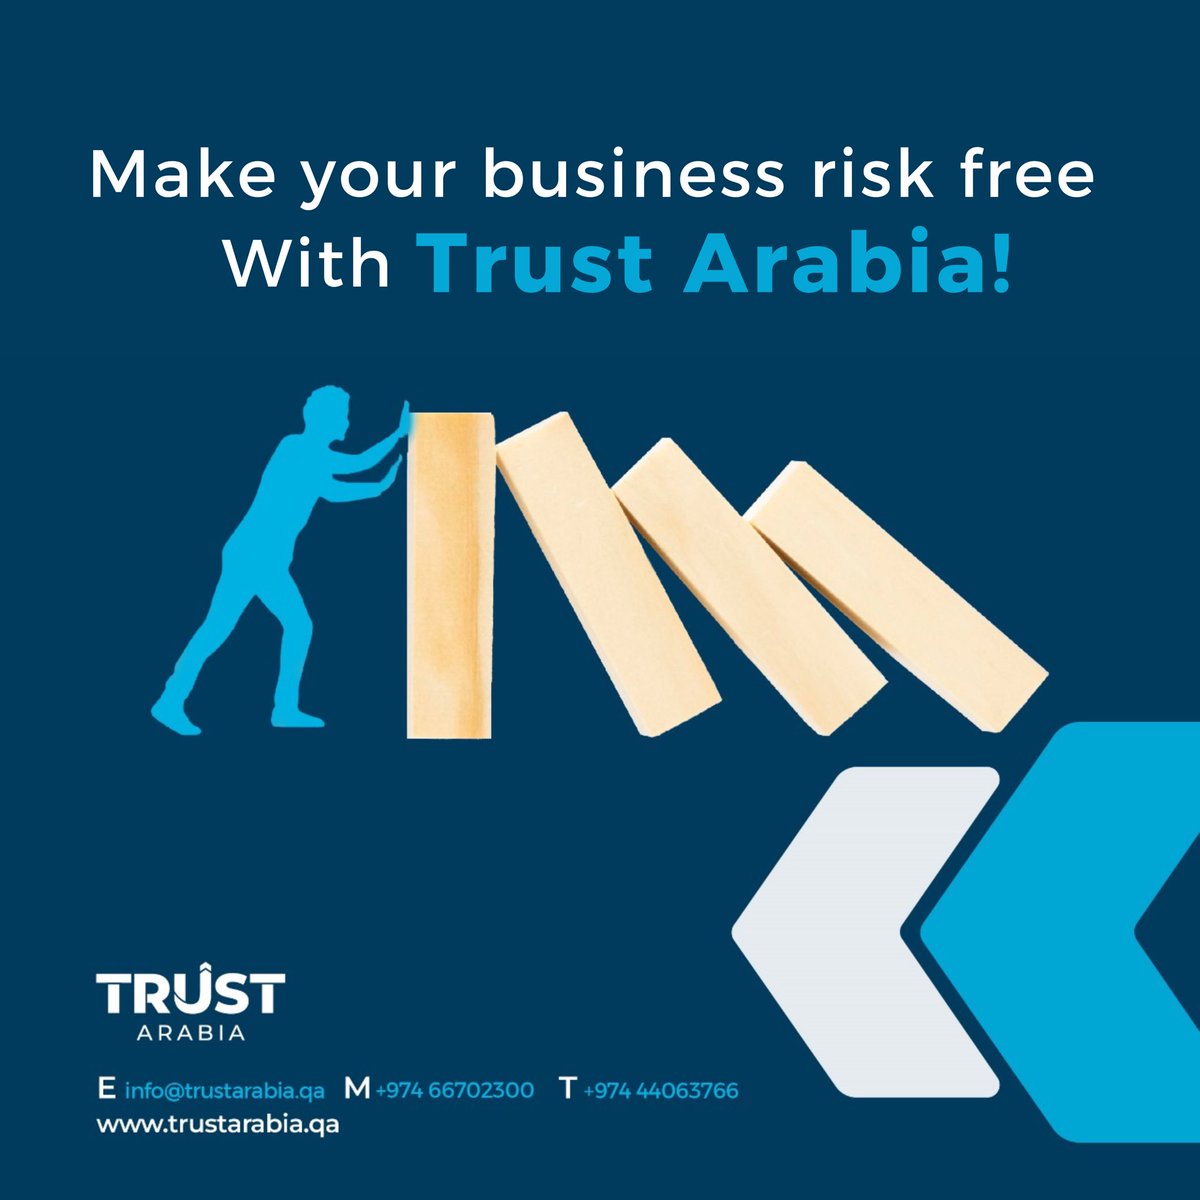 Make your business risk free with Trust Arabia 😉

Contact Us Now:
+974-66702300 📱 
+974-44063766 ☎️ 
Email : info@trustarabia.qa 📧 

#hroutsourcing #saudiarabia #startabusiness #BusinessVersatility  #DohaAdminExperts #QatarConsulting #OfficeSolutionsQatar #AdminServicesDoha